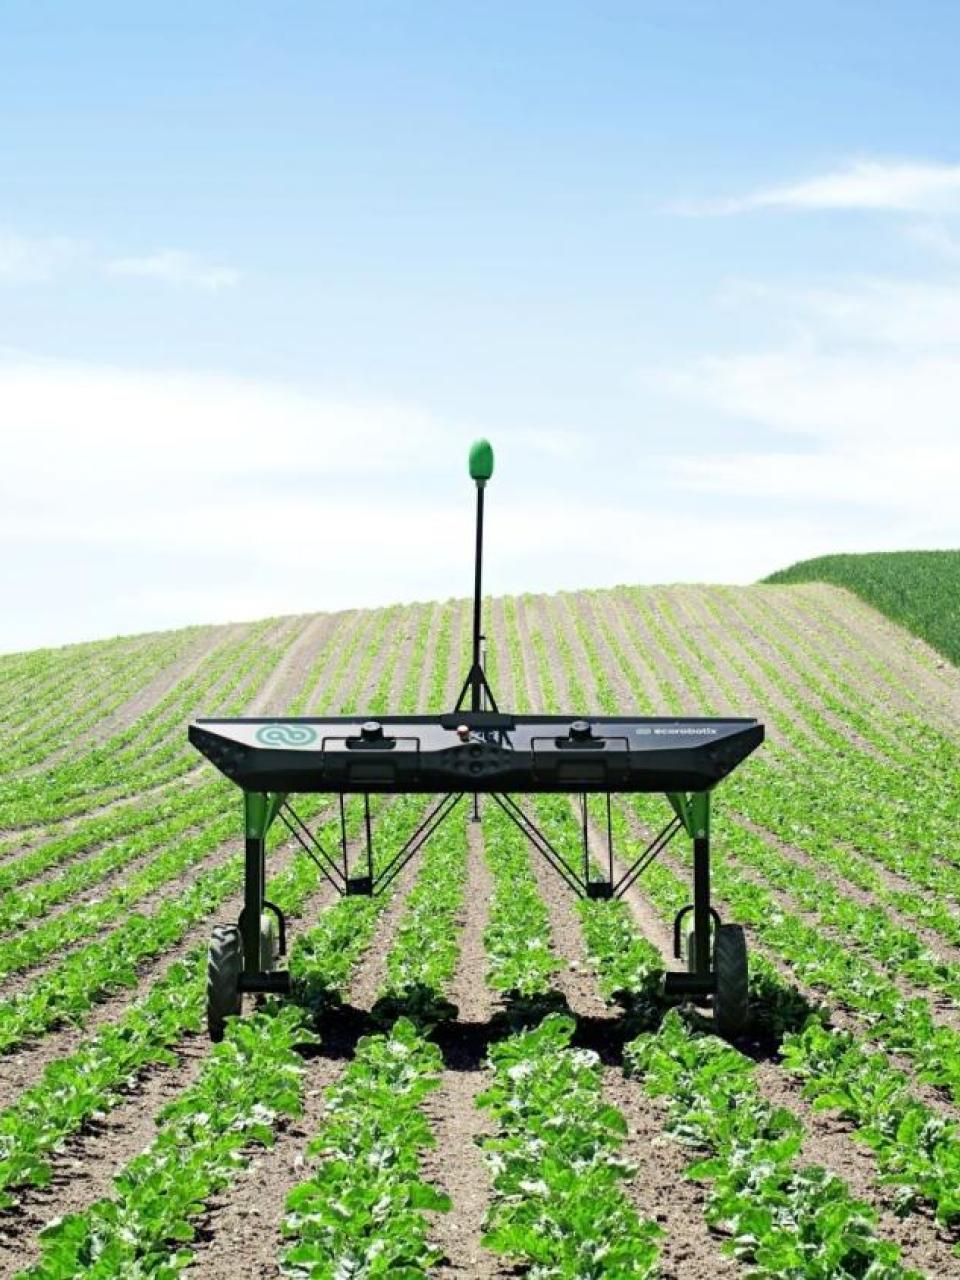 90% less herbicide thanks to the robot’s targeted weeding © ecoRobotix 